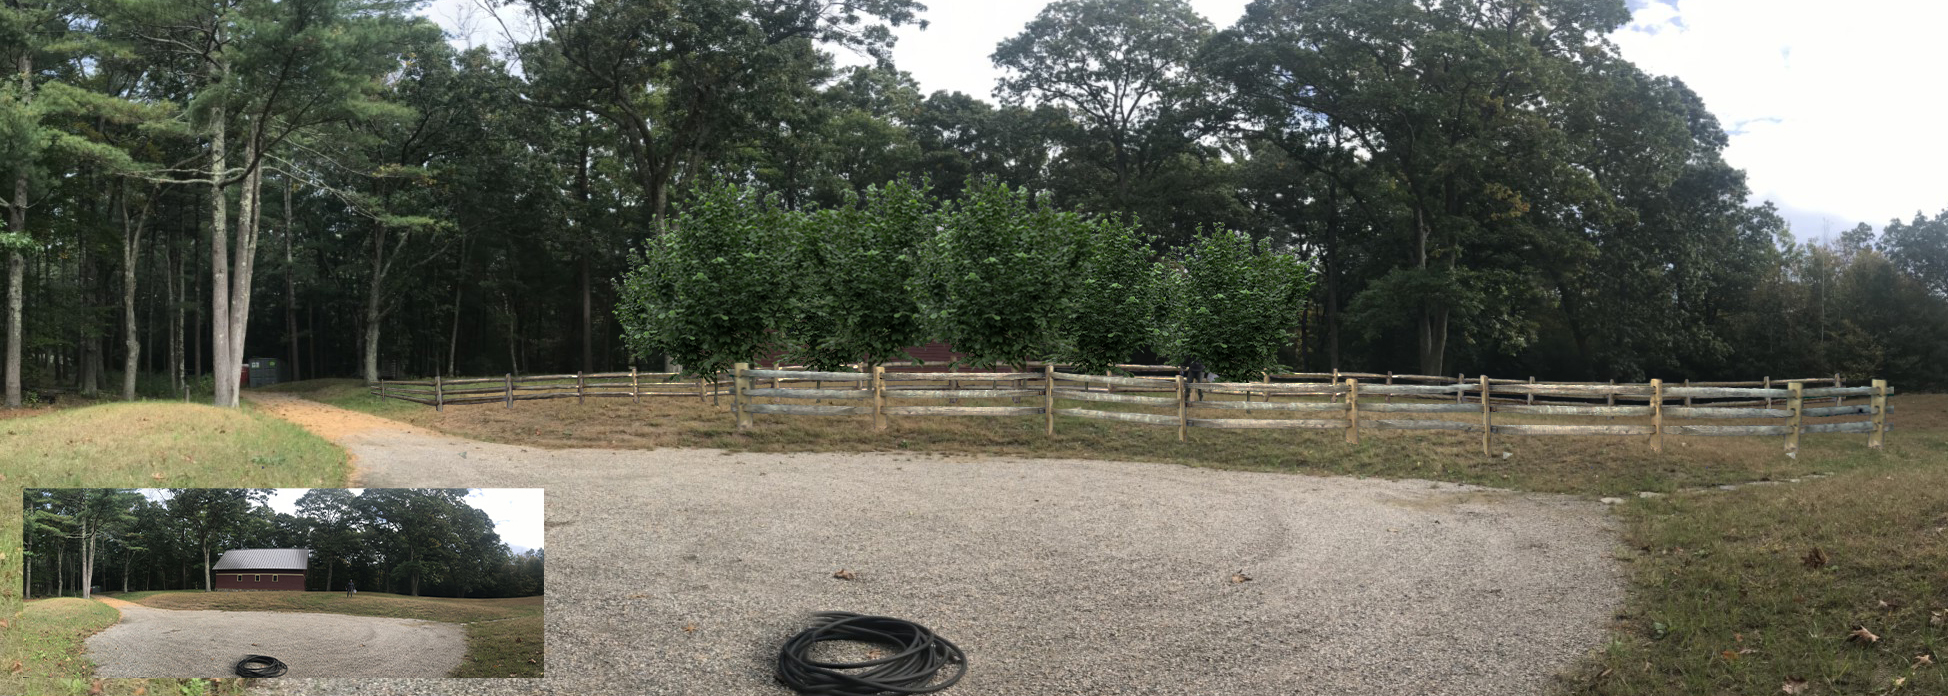 Hazelnut trees and fence added to existing field